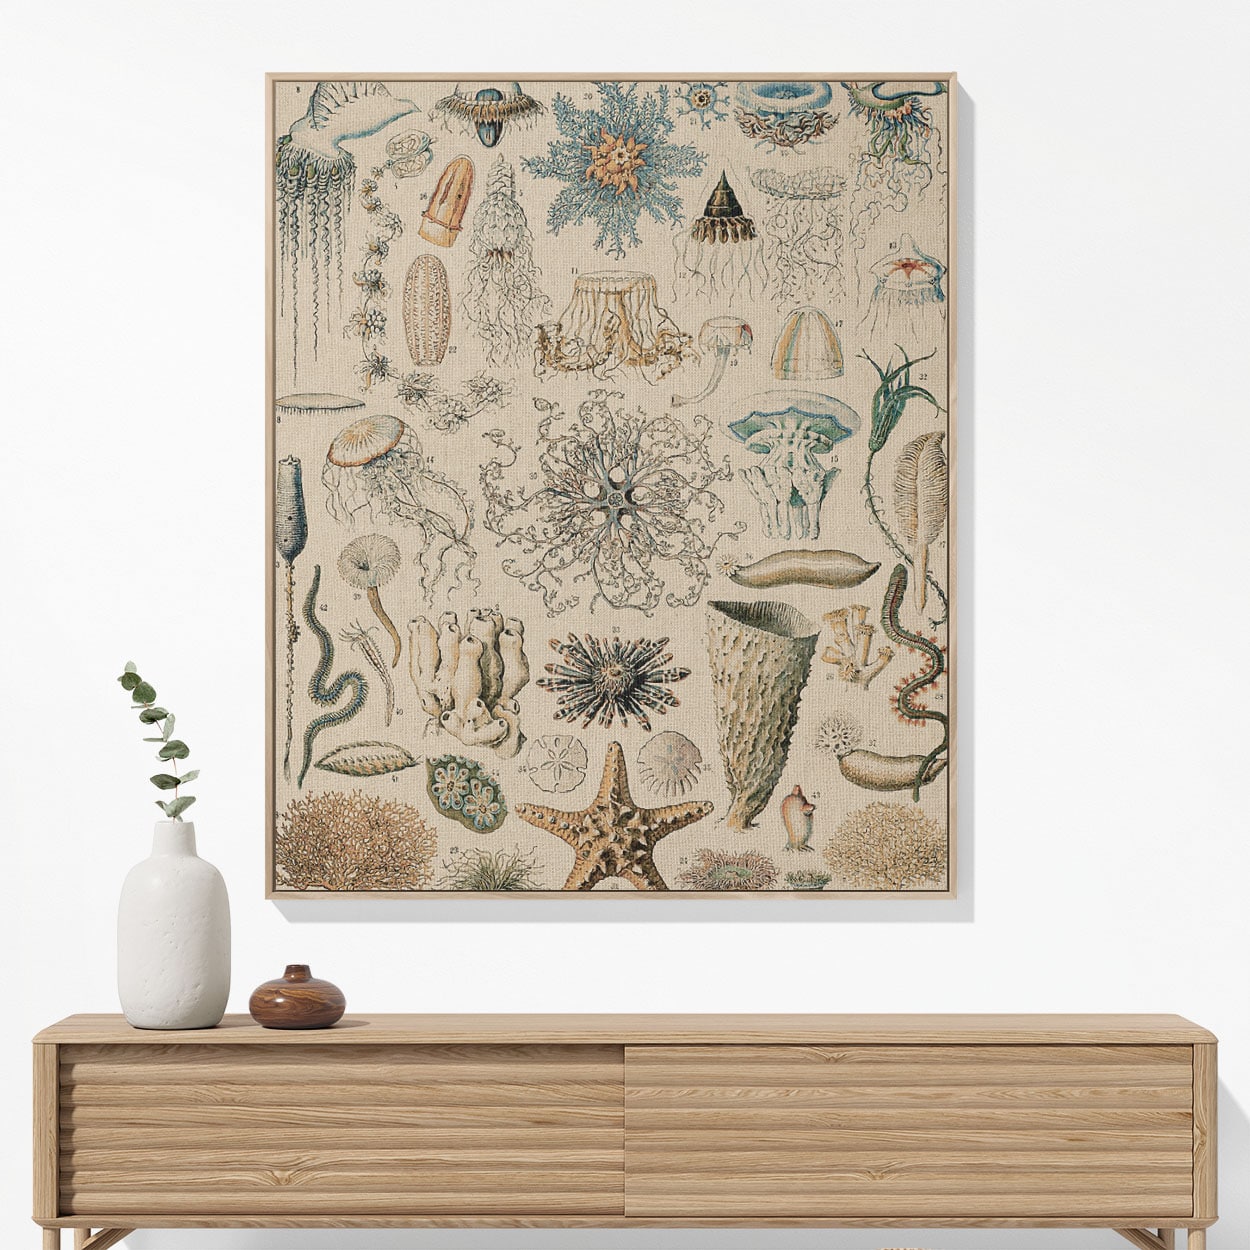 Jelly Fish Woven Blanket Woven Blanket Hanging on a Wall as Framed Wall Art